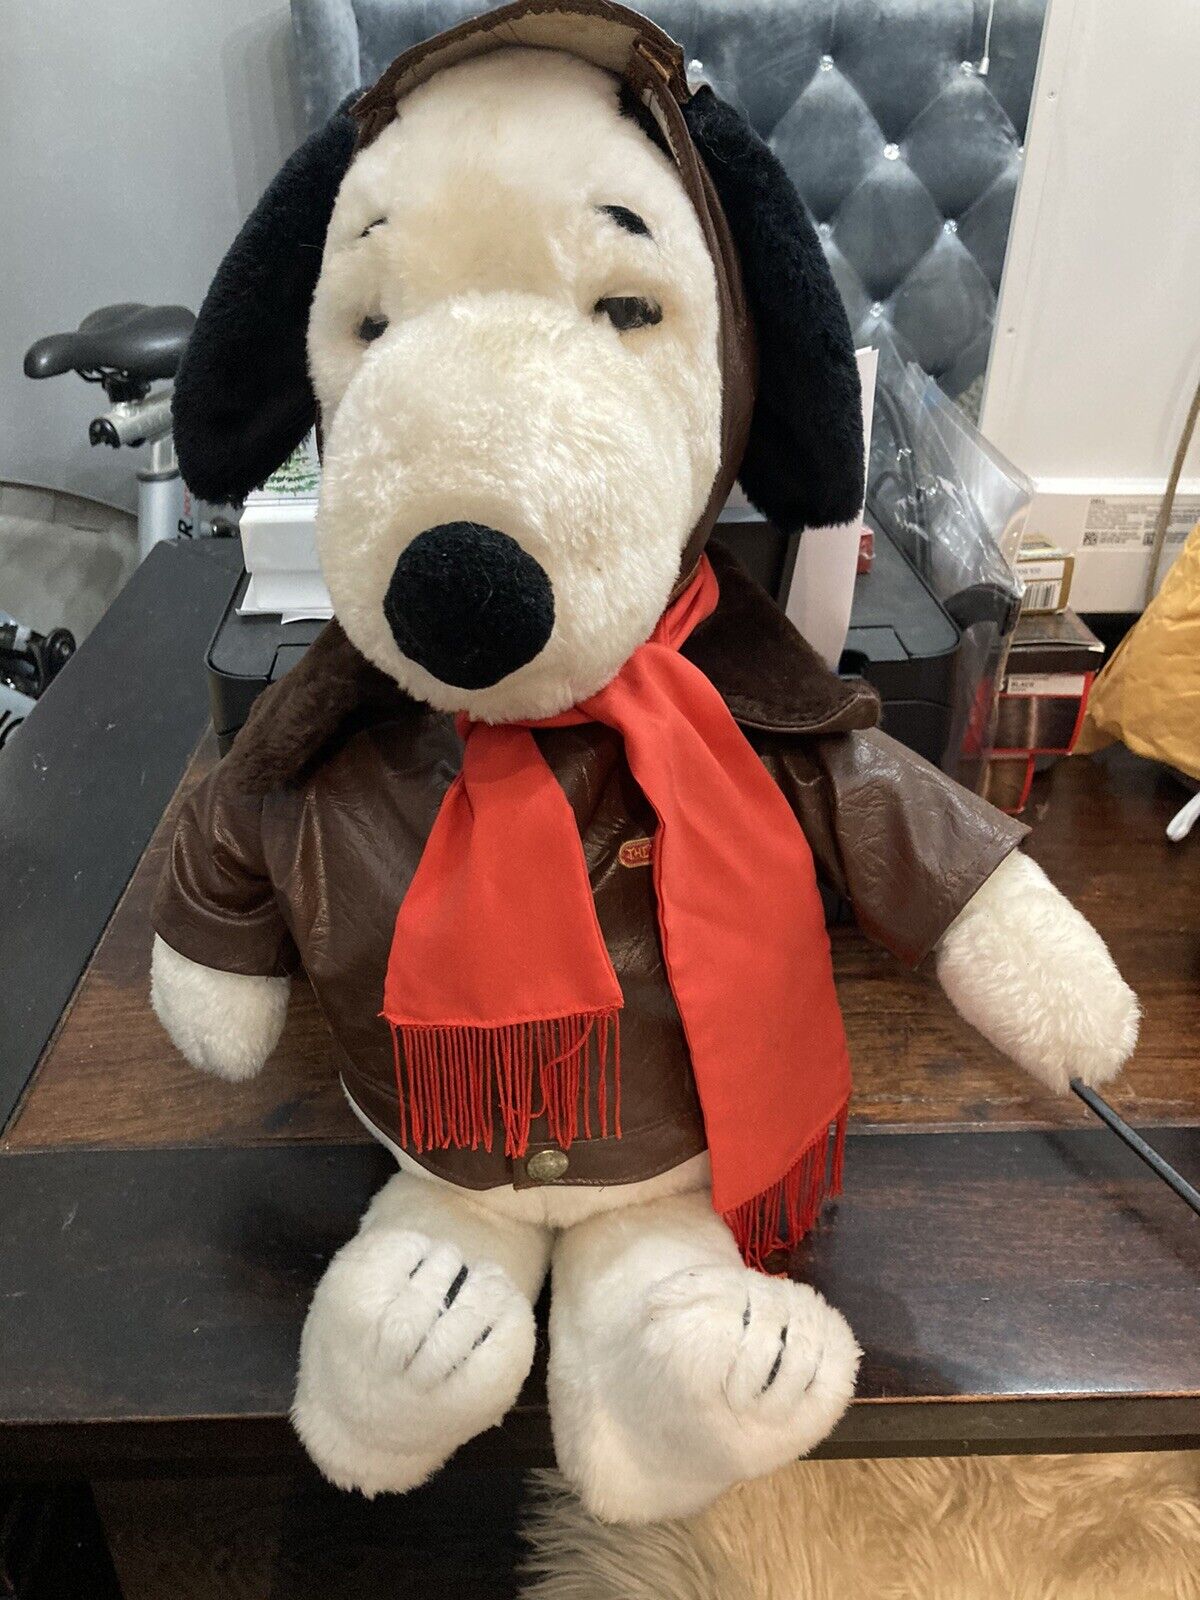 The World of Wonders Snoopy 1986 Talking Plush Snoopy w/Bomber Jacket and Scarf